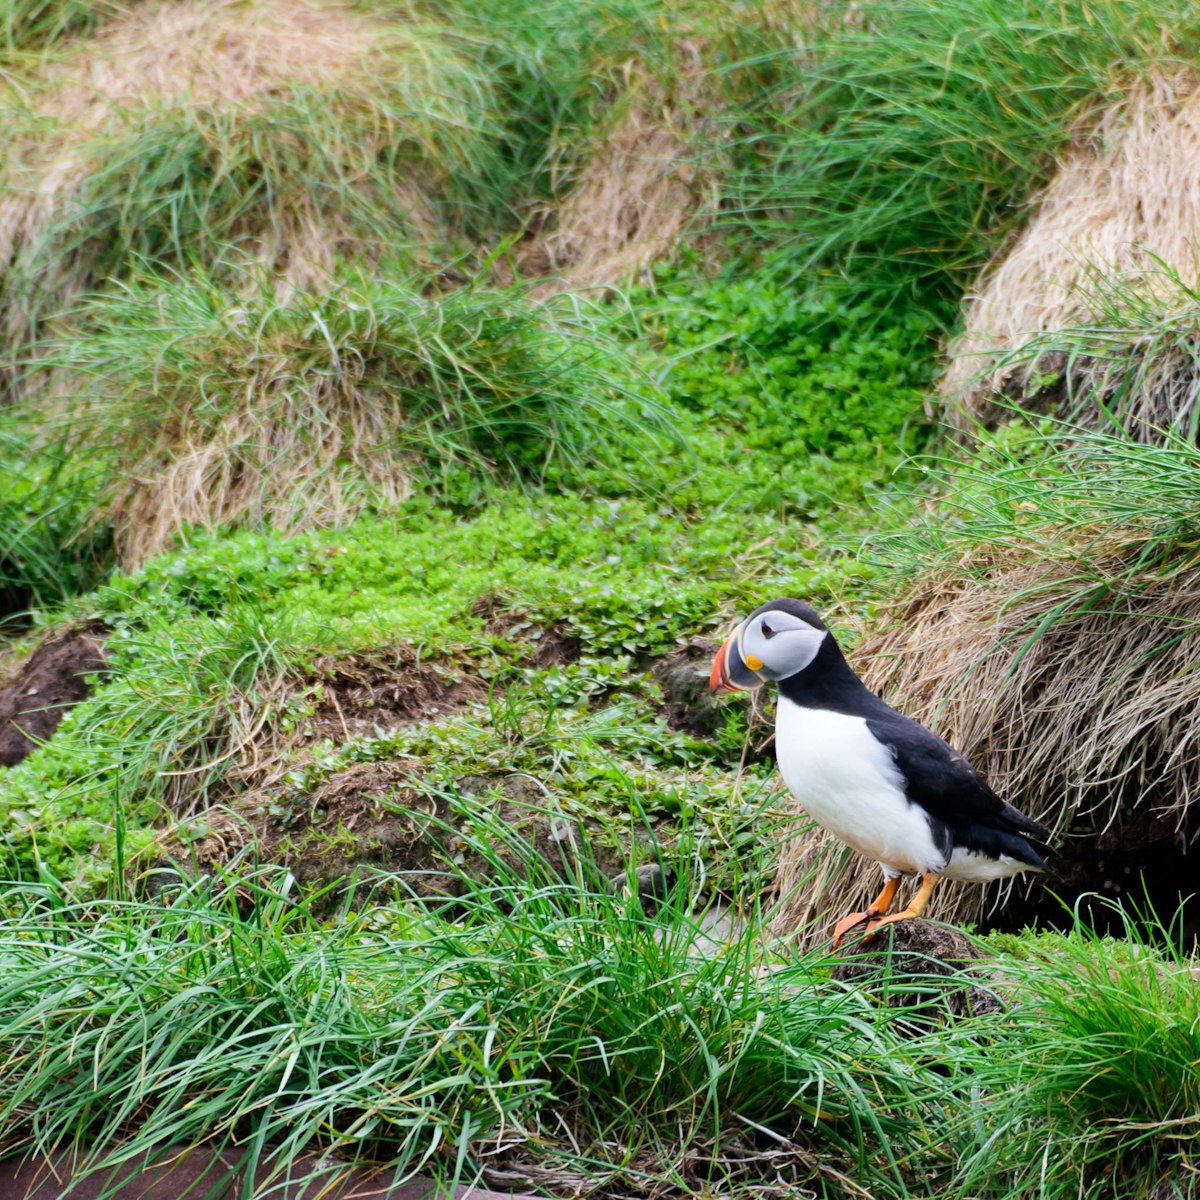 Puffin nesting on the islands of Witless Bay Ecological Reserve.
689426863
alcids, america, animals, aquatic, arctica, atlantic, auks, avian, bay, beak, bird, canada, canadian, common, conservation, ecological, environment, environmental, feather, horizontal, labrador, living, marine, nature, nest, newfoundland, north, organism, ornithology, outdoors, outside, puffin, reserve, watching, water, wild, wildlife, wing, witless